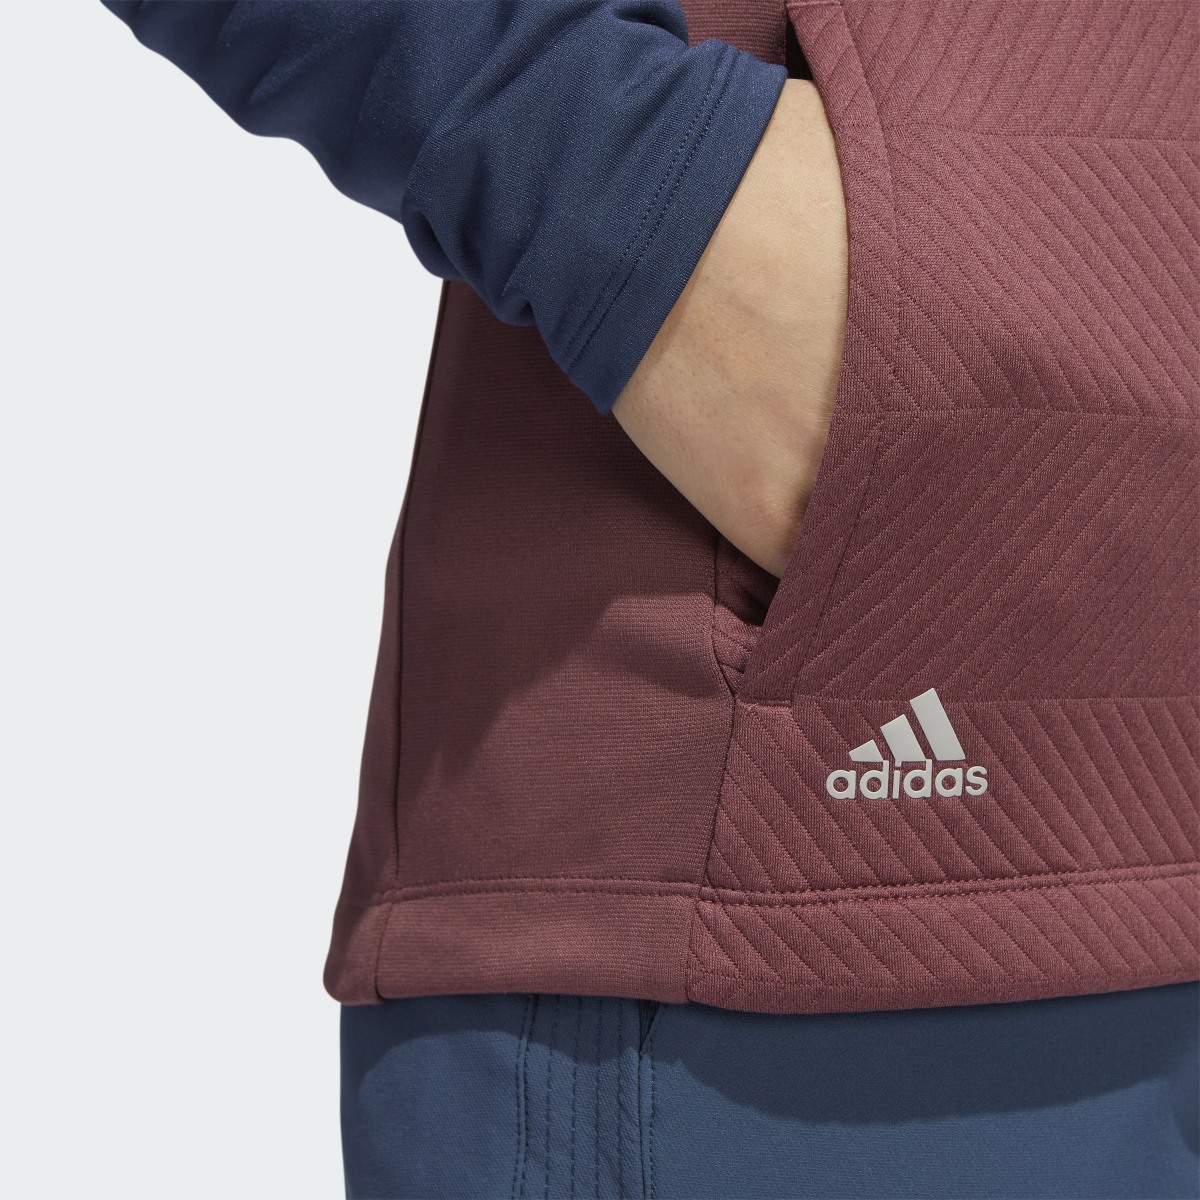 Adidas COLD.RDY Full-Zip Vest. 6